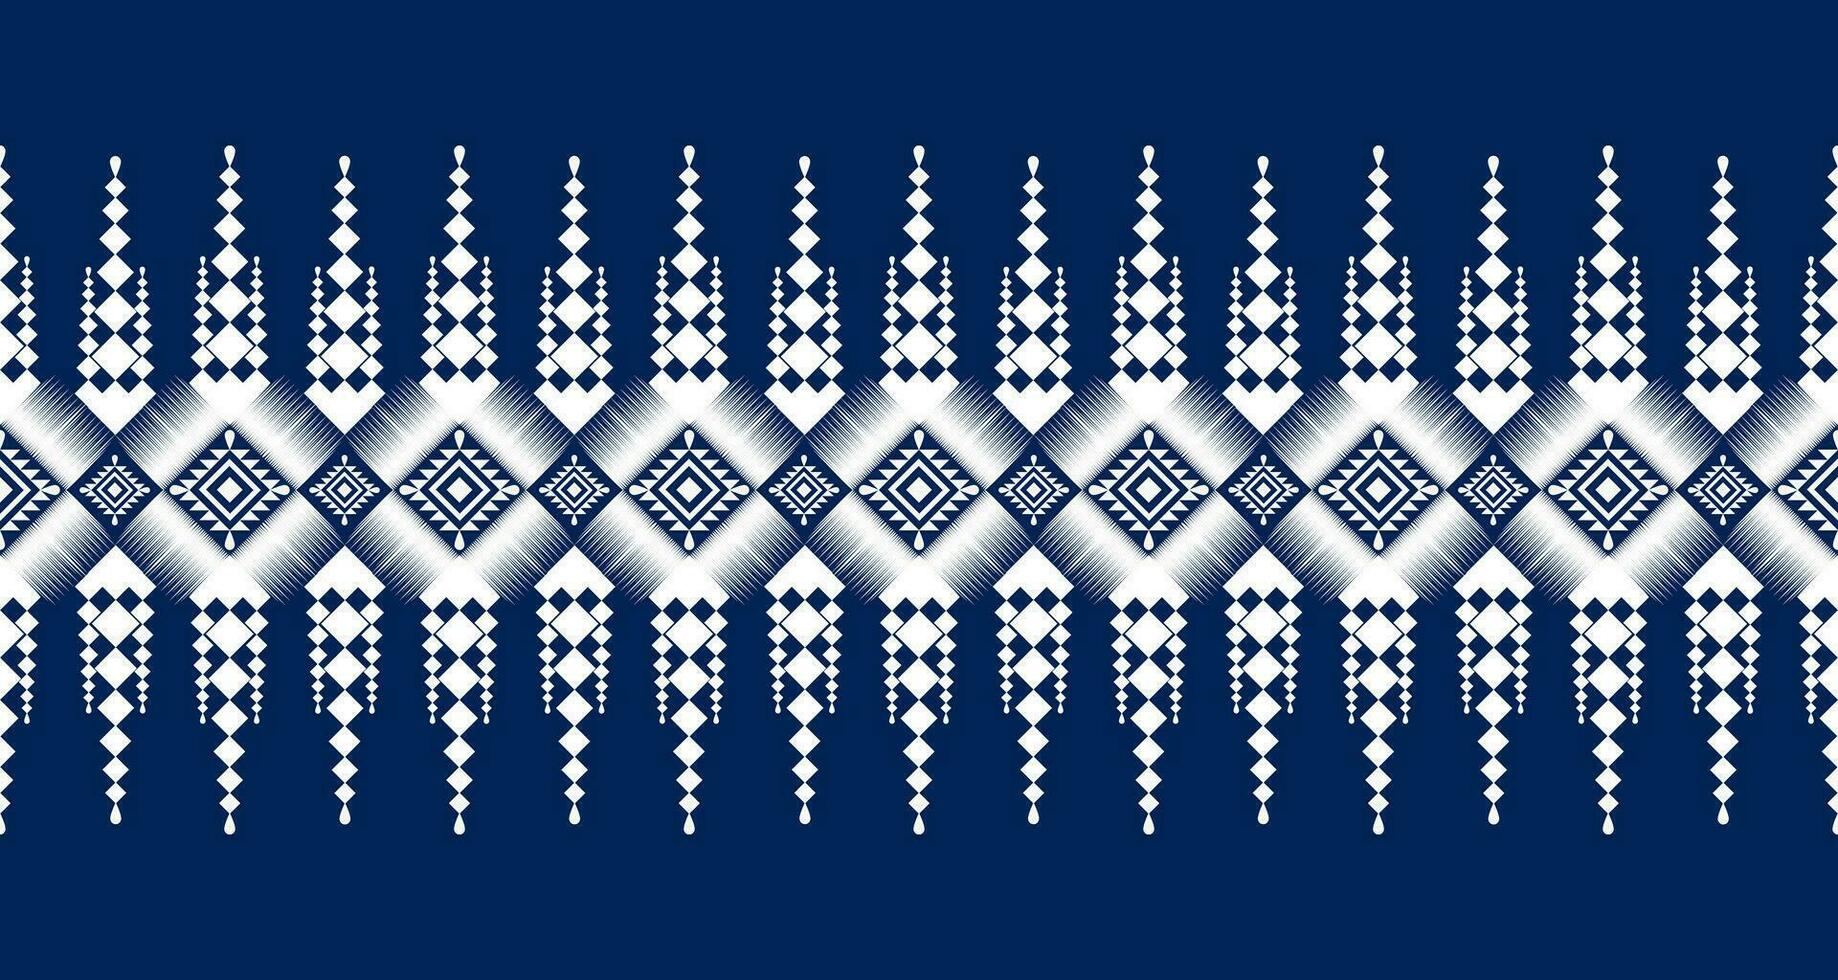 Ikat geometric folklore ornament with diamonds. Tribal ethnic vector texture. Seamless striped pattern in Aztec style. Folk embroidery. Indian, Scandinavian, Gypsy,